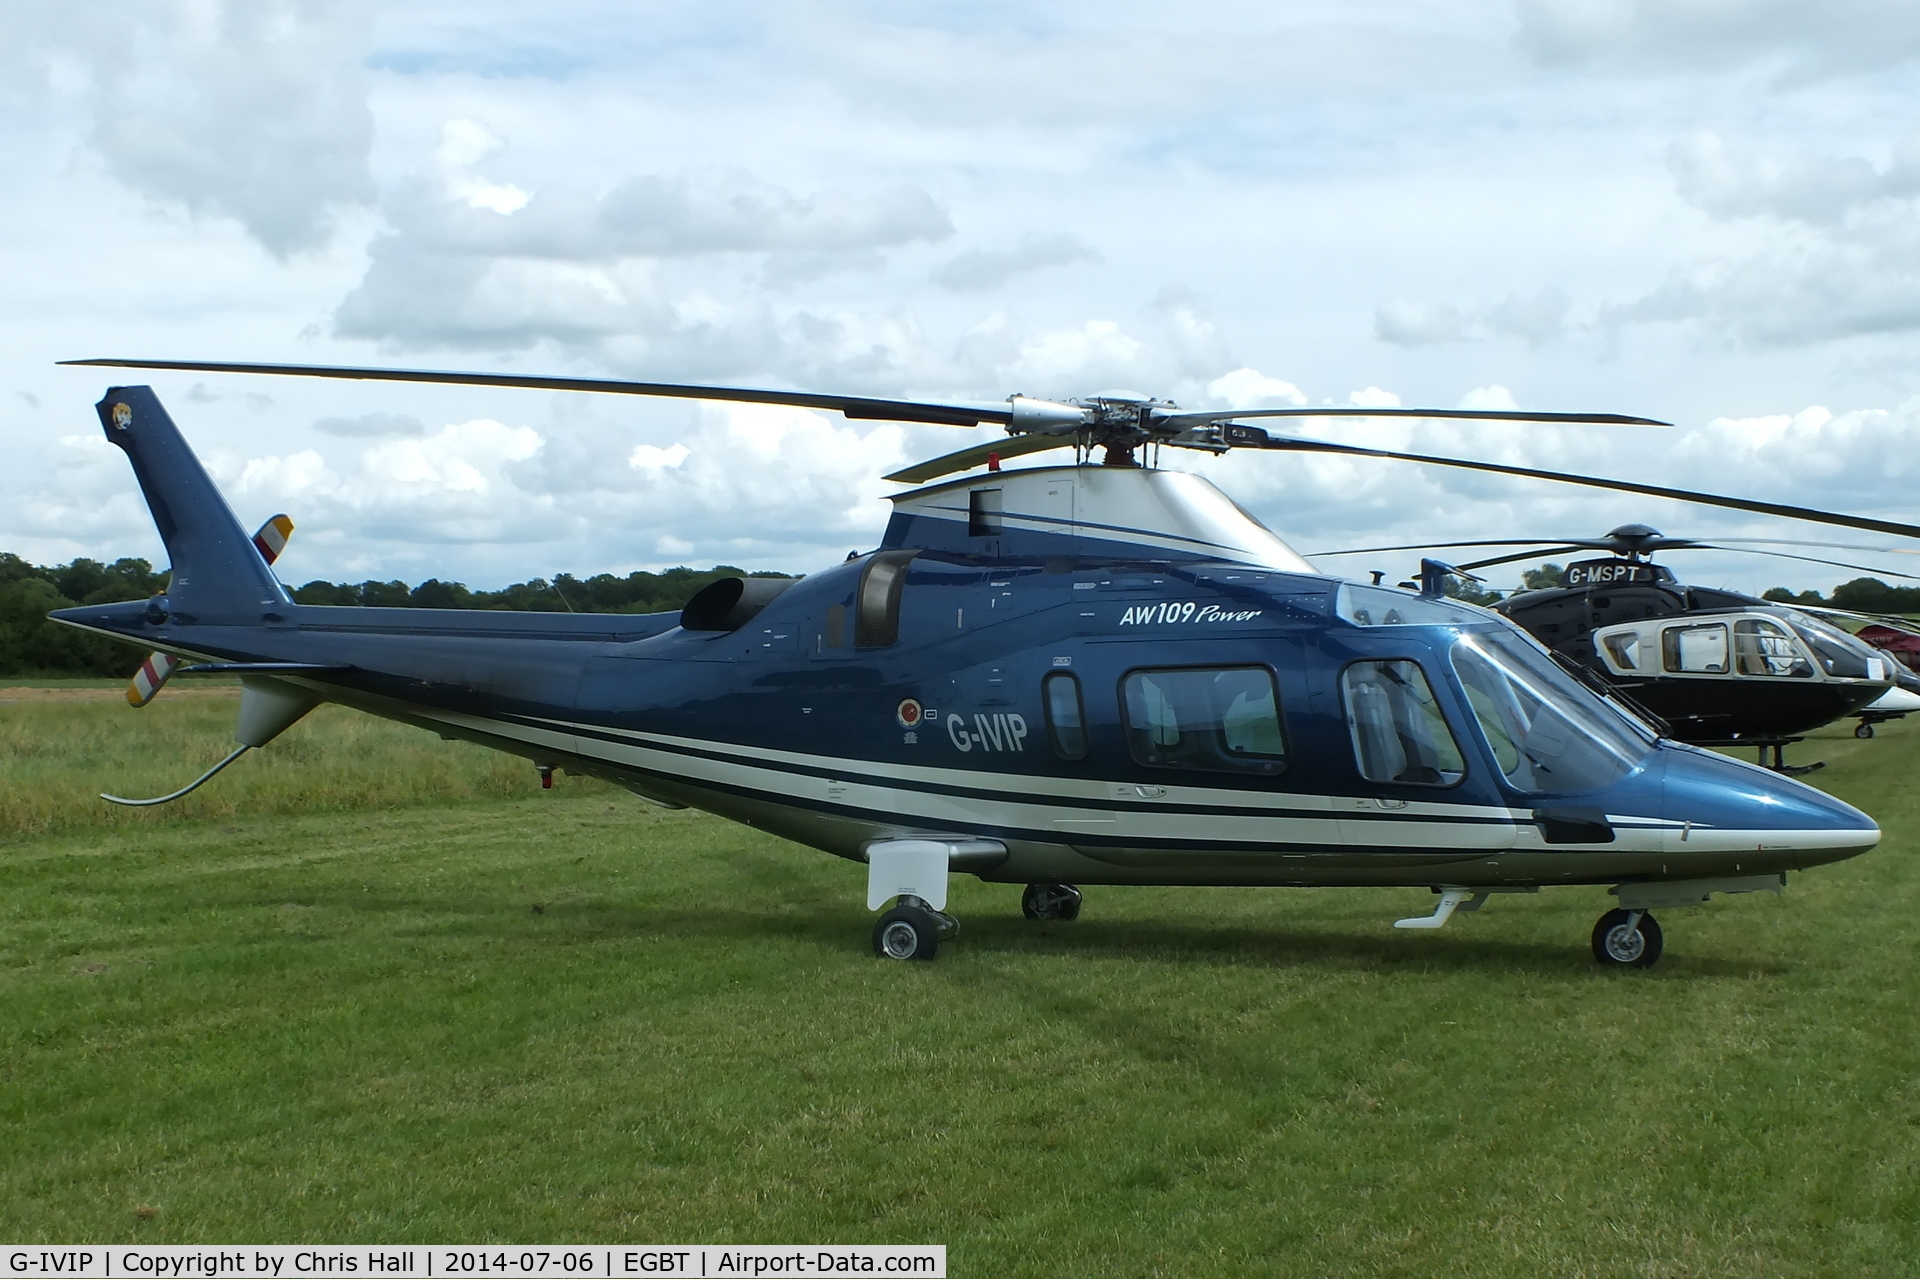 G-IVIP, 2003 Agusta A-109E Power C/N 11208, ferrying race fans to the British F1 Grand Prix at Silverstone